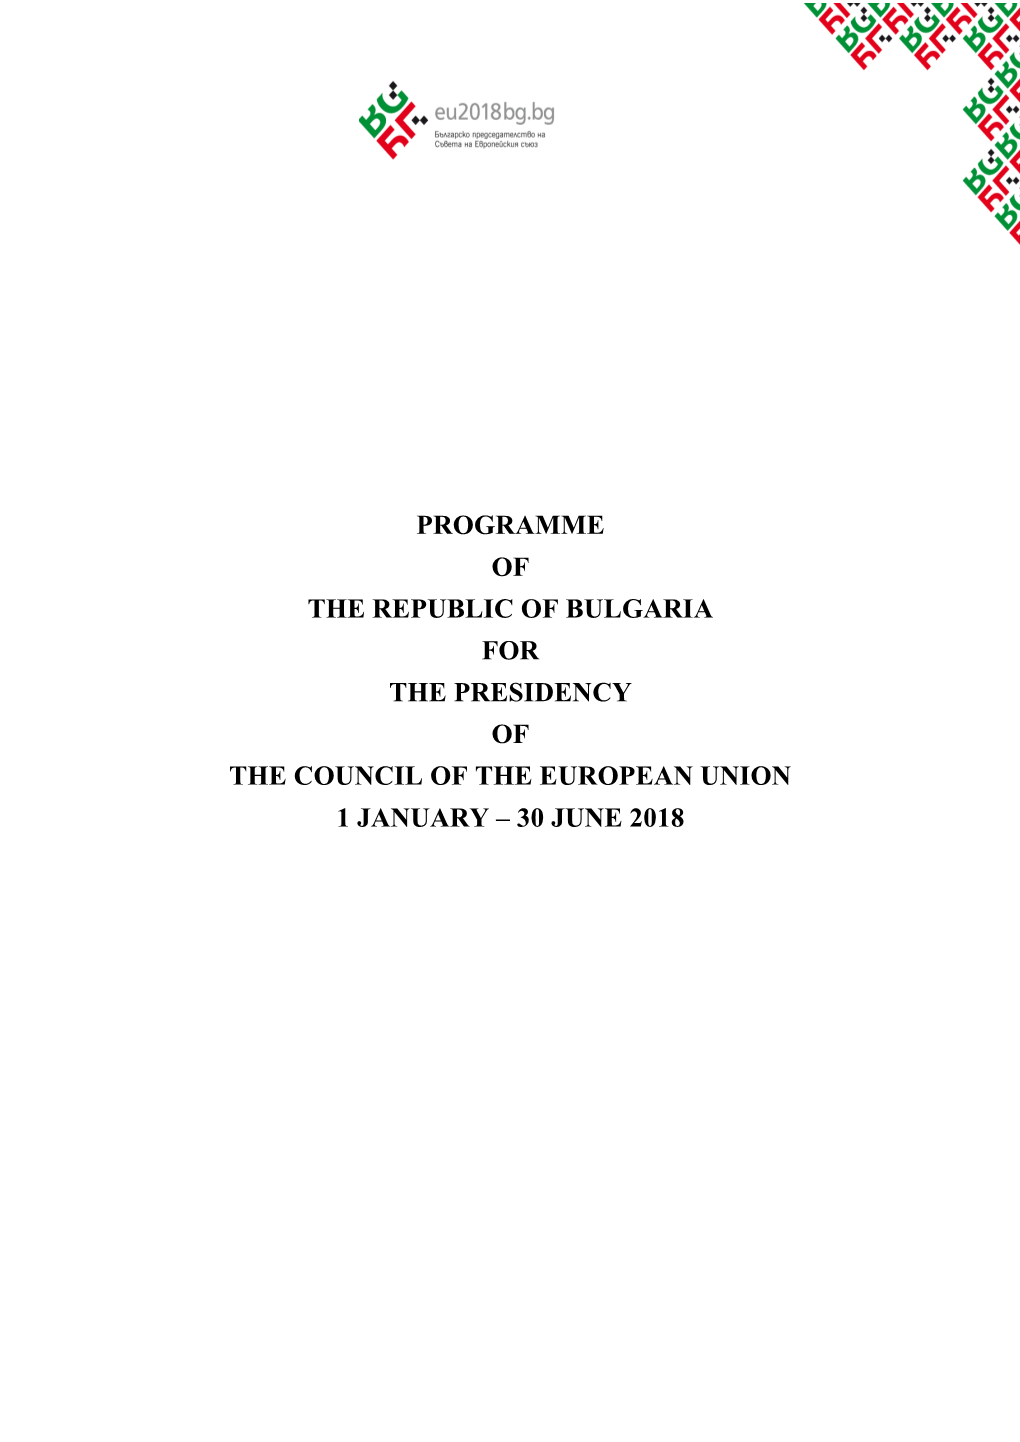 Programme of the Republic of Bulgaria for the Presidency of the Council of the European Union 1 January – 30 June 2018 Contents